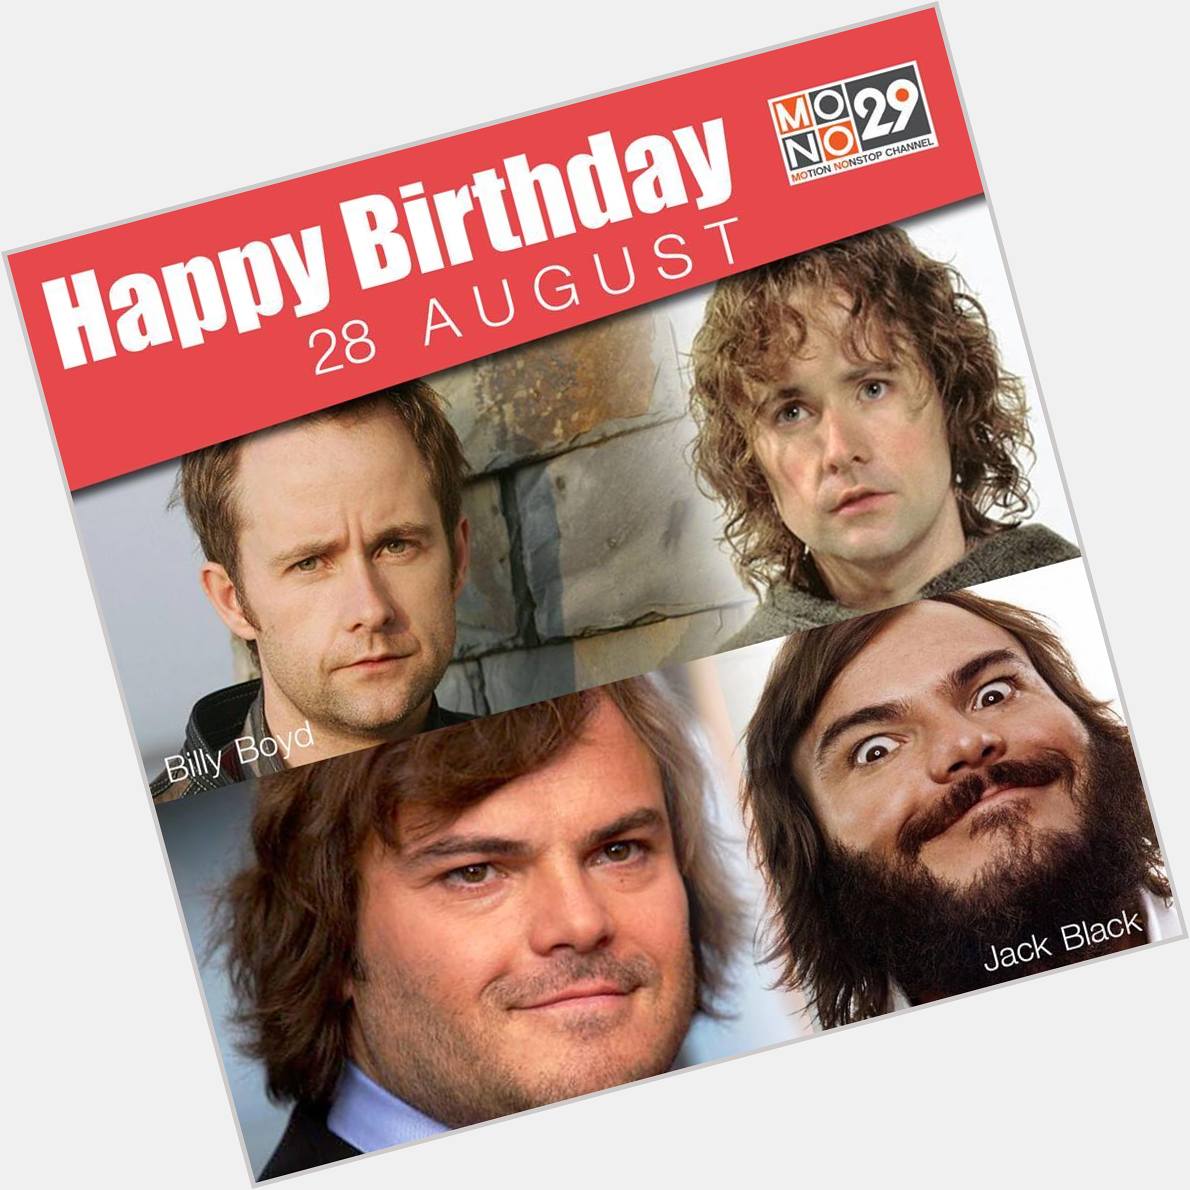 28 August Happy Birthday
- Billy Boyd (The Lord of the Rings)
- Jack Black (School of Rock) 